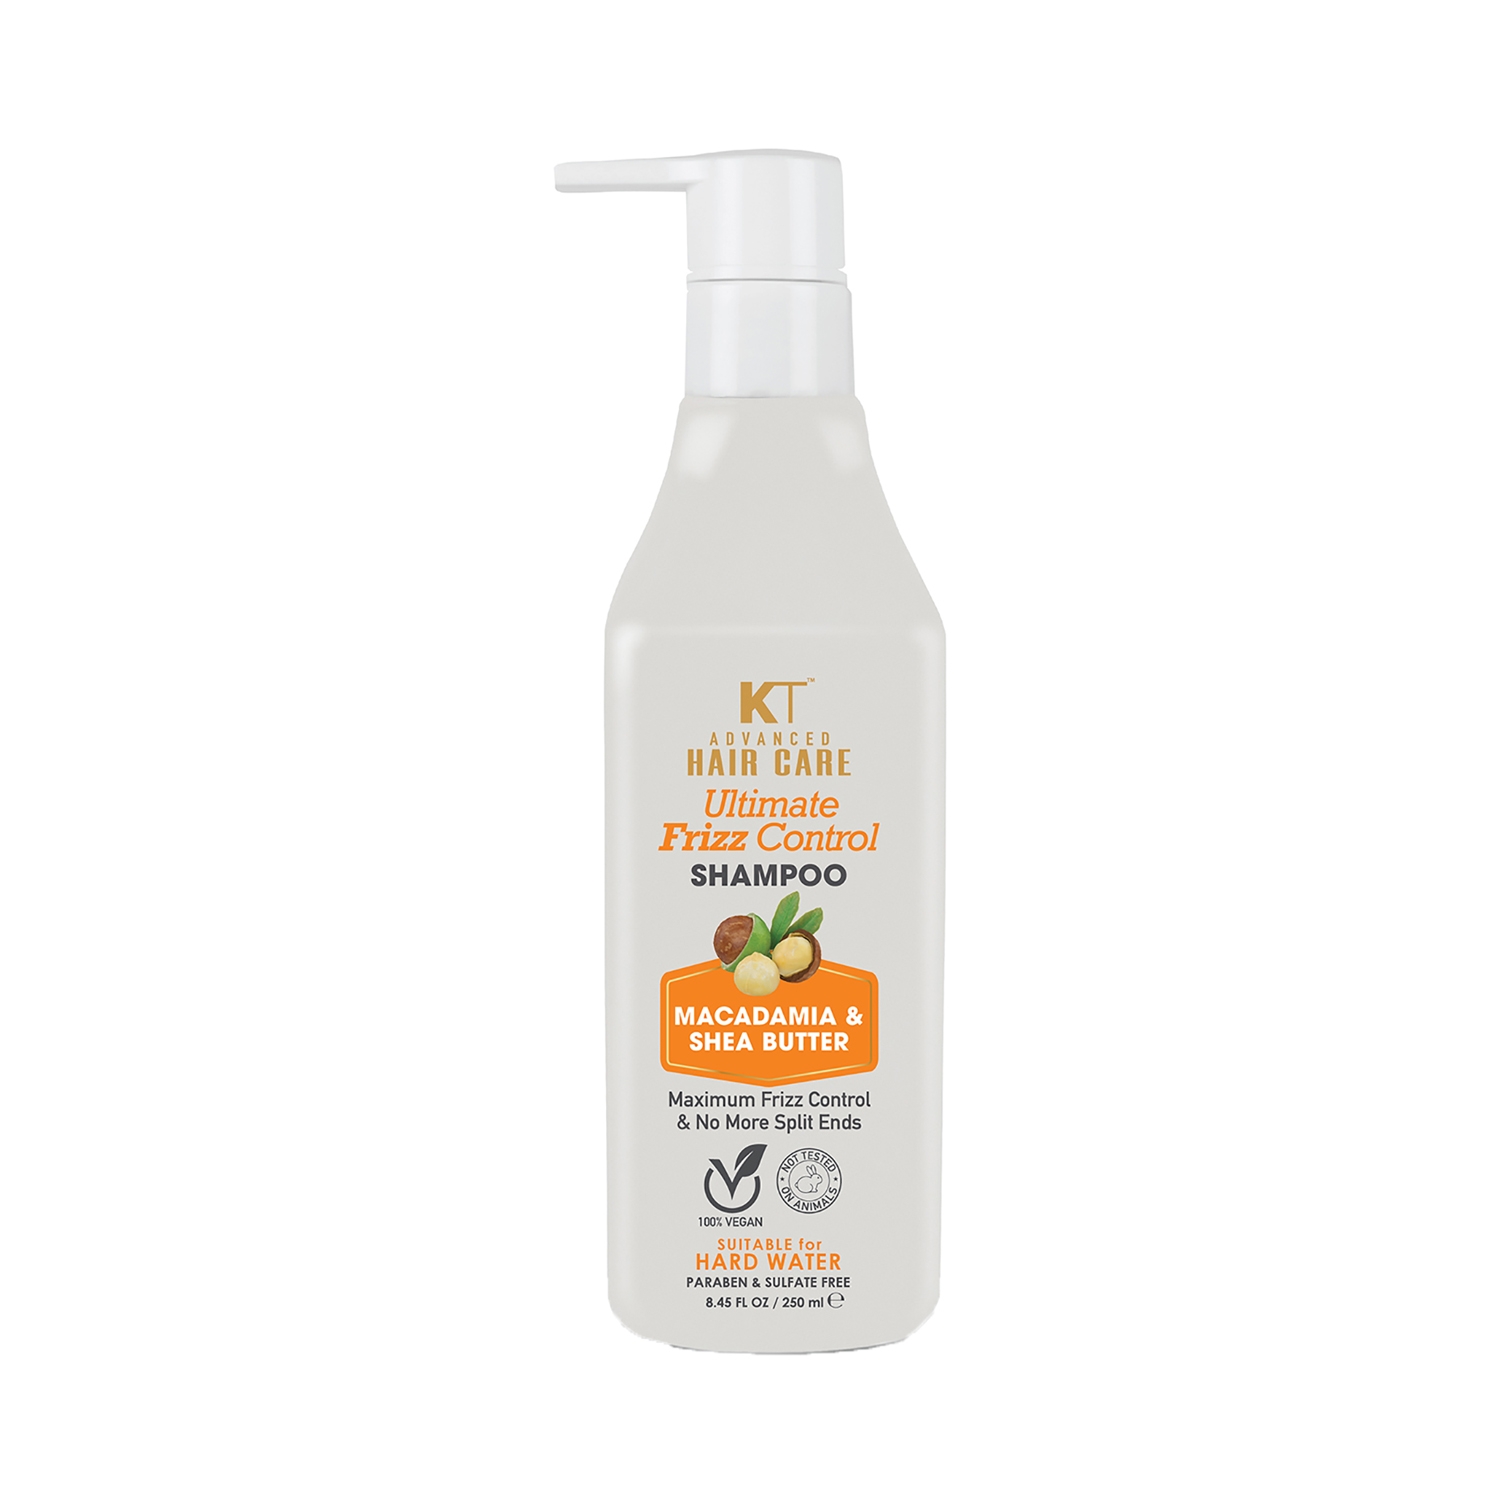 KT Professional | KT Professional Advanced Hair Care Ultimate Frizz Control Shampoo (250ml)